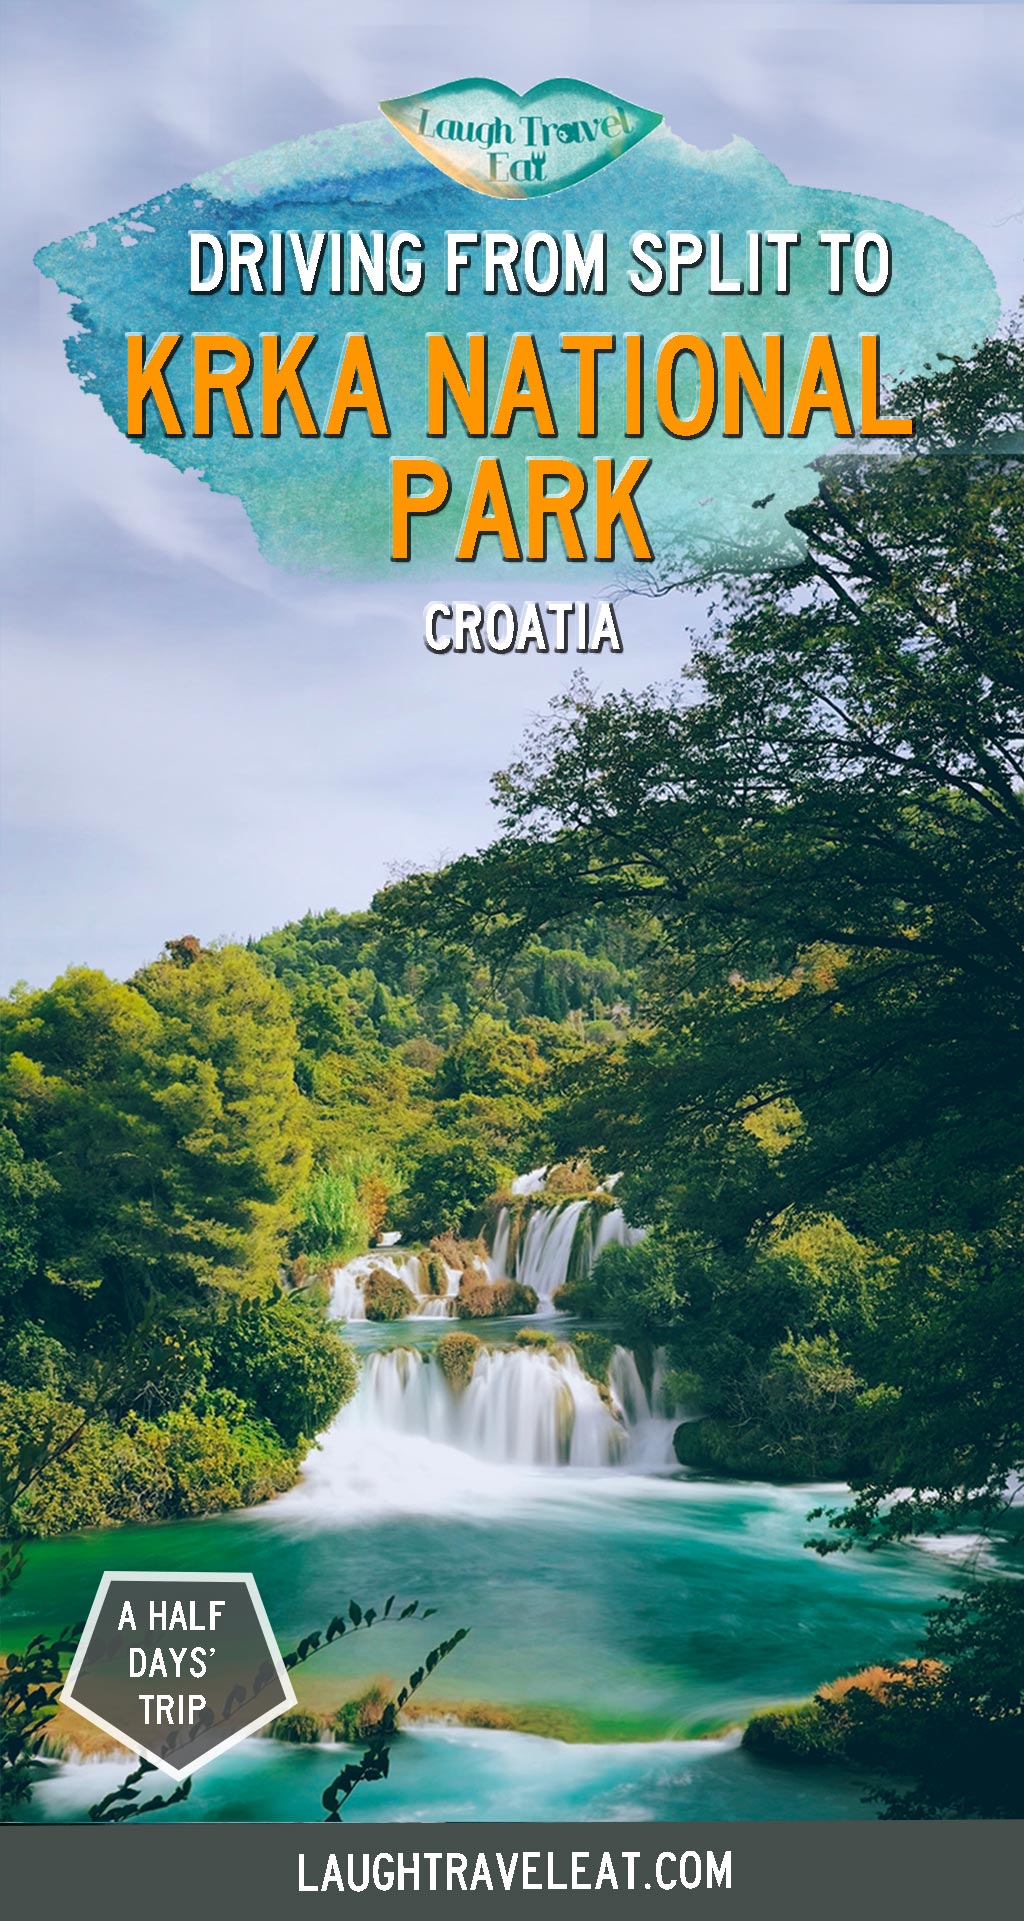 Krka National Park is the less famous sibling of Plitvice in Croatia. Located between Split and Zadar, it's a perfect day trip destination. Here's a self drive guide to Krka from Splie: #Krka #NationalPark #Croatia